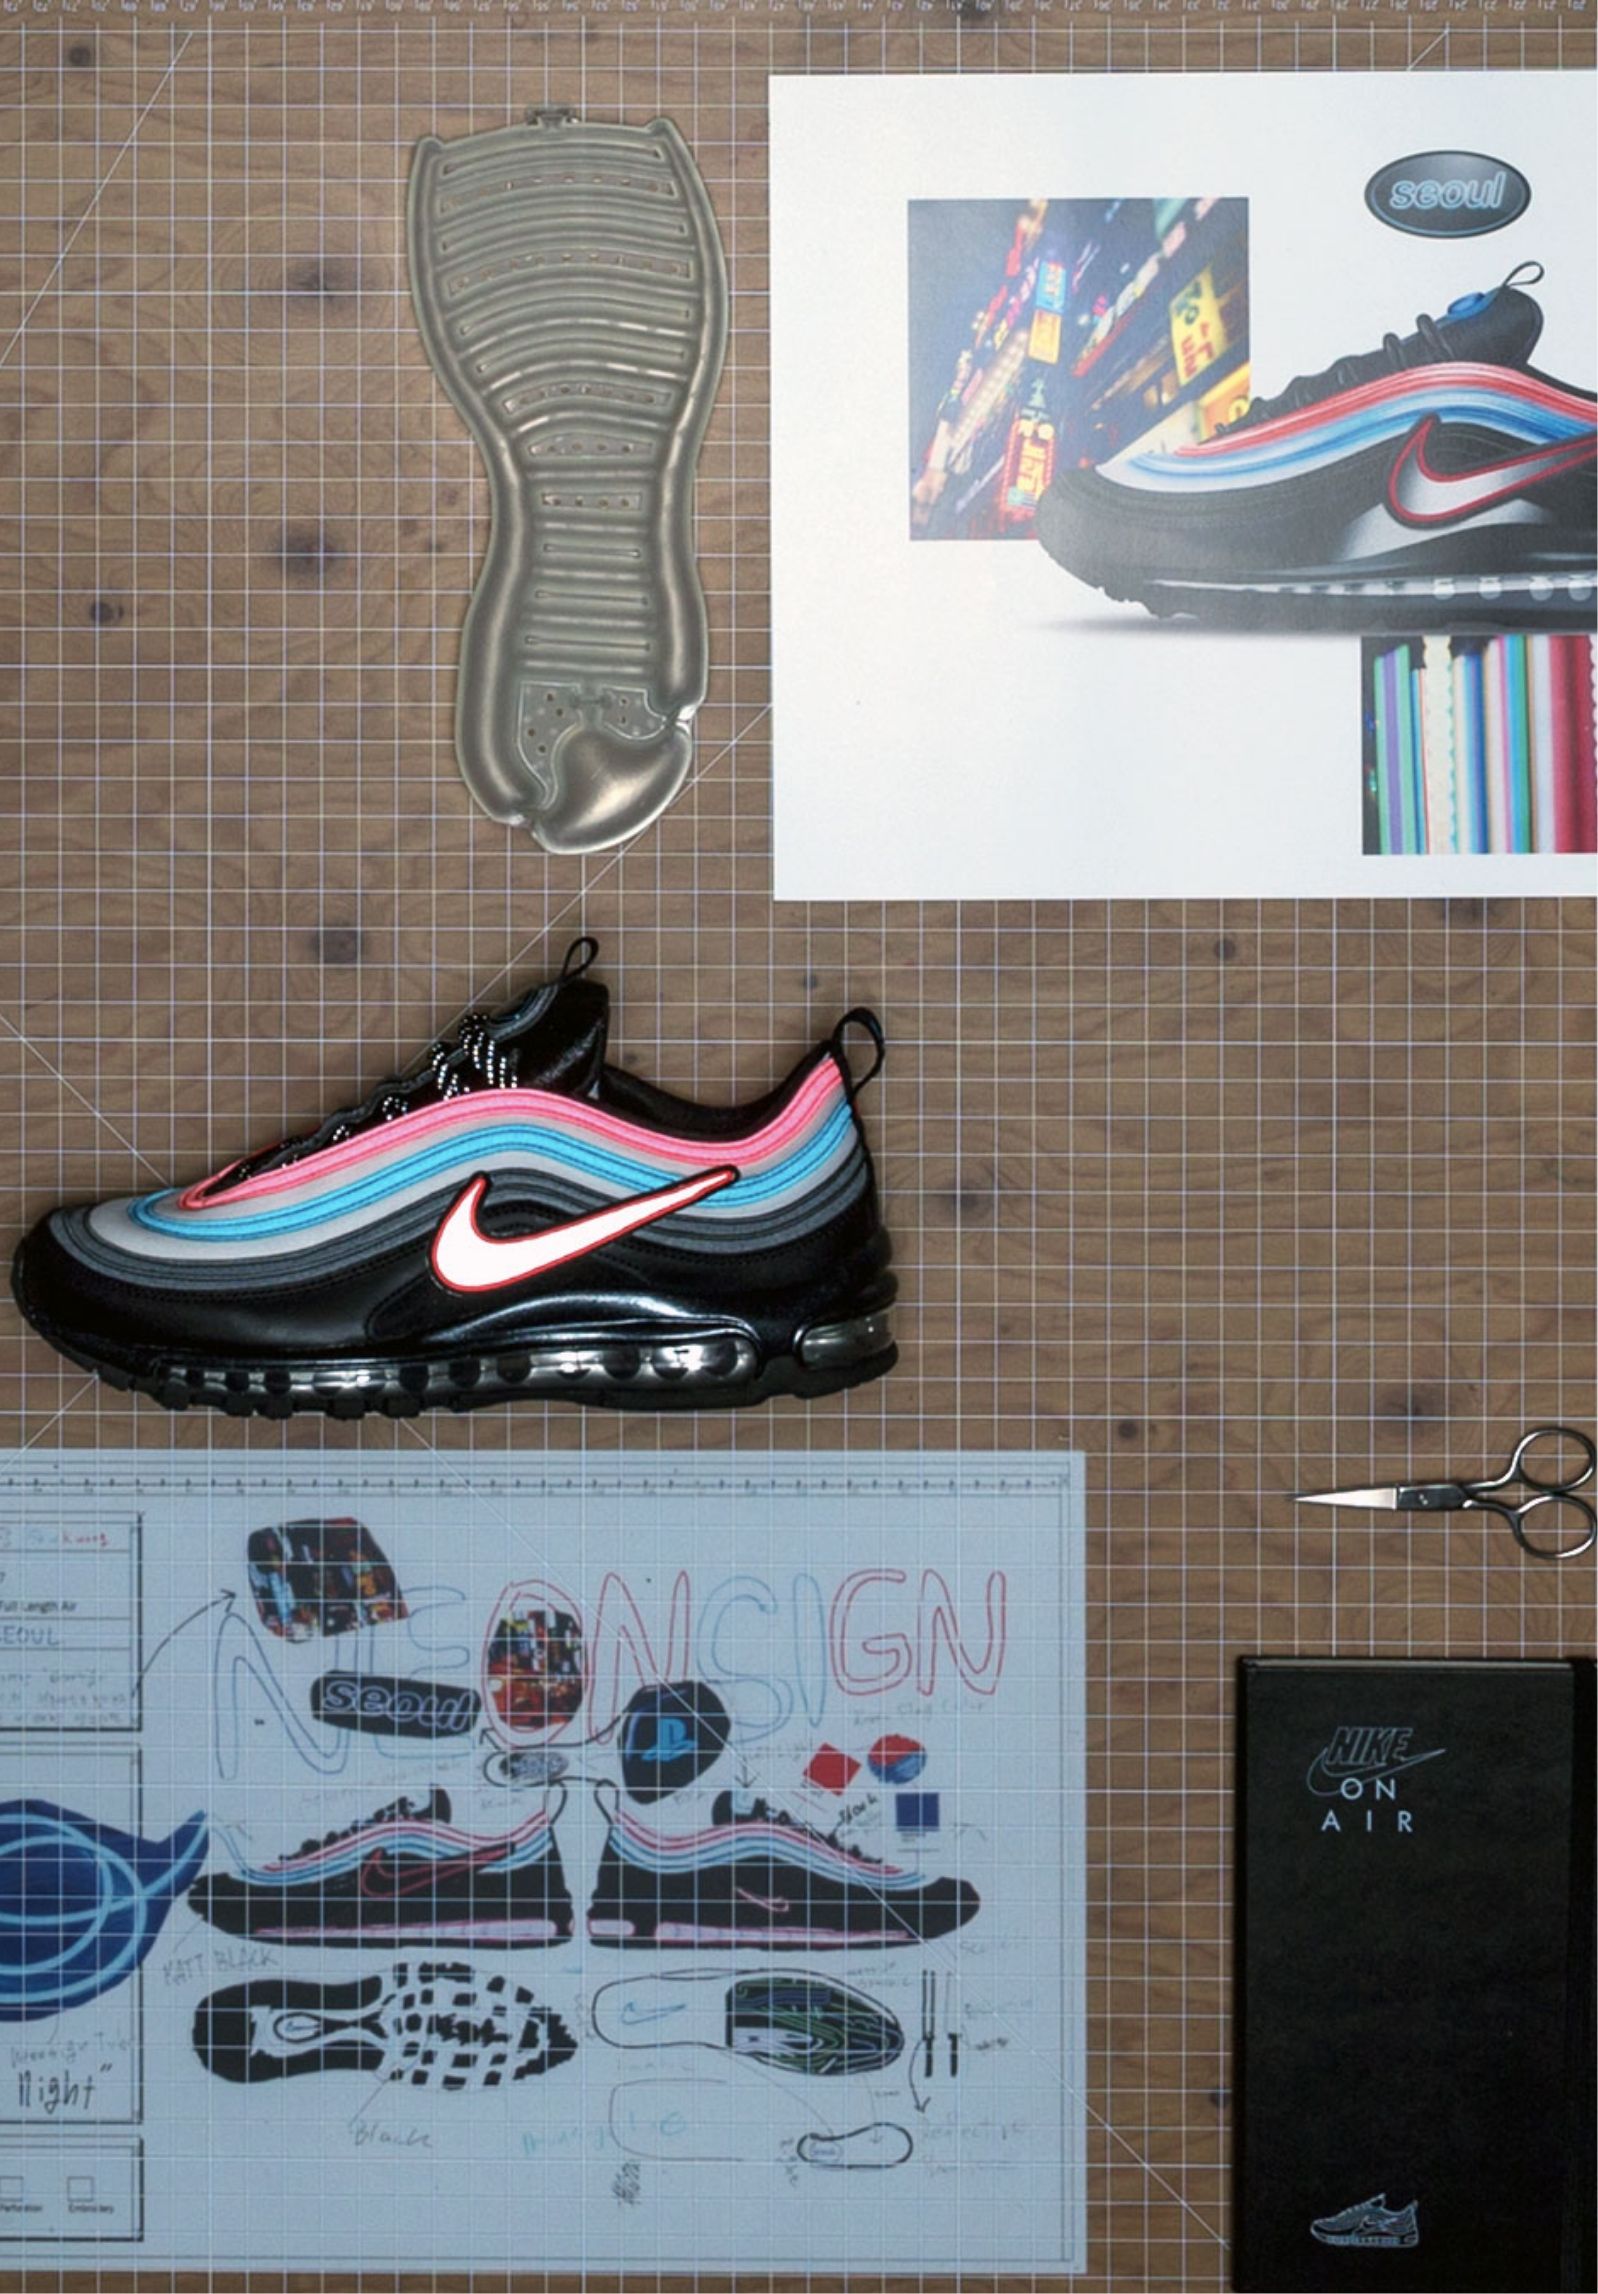 Air Max 97 Neon Seoul design sketches and final product on table